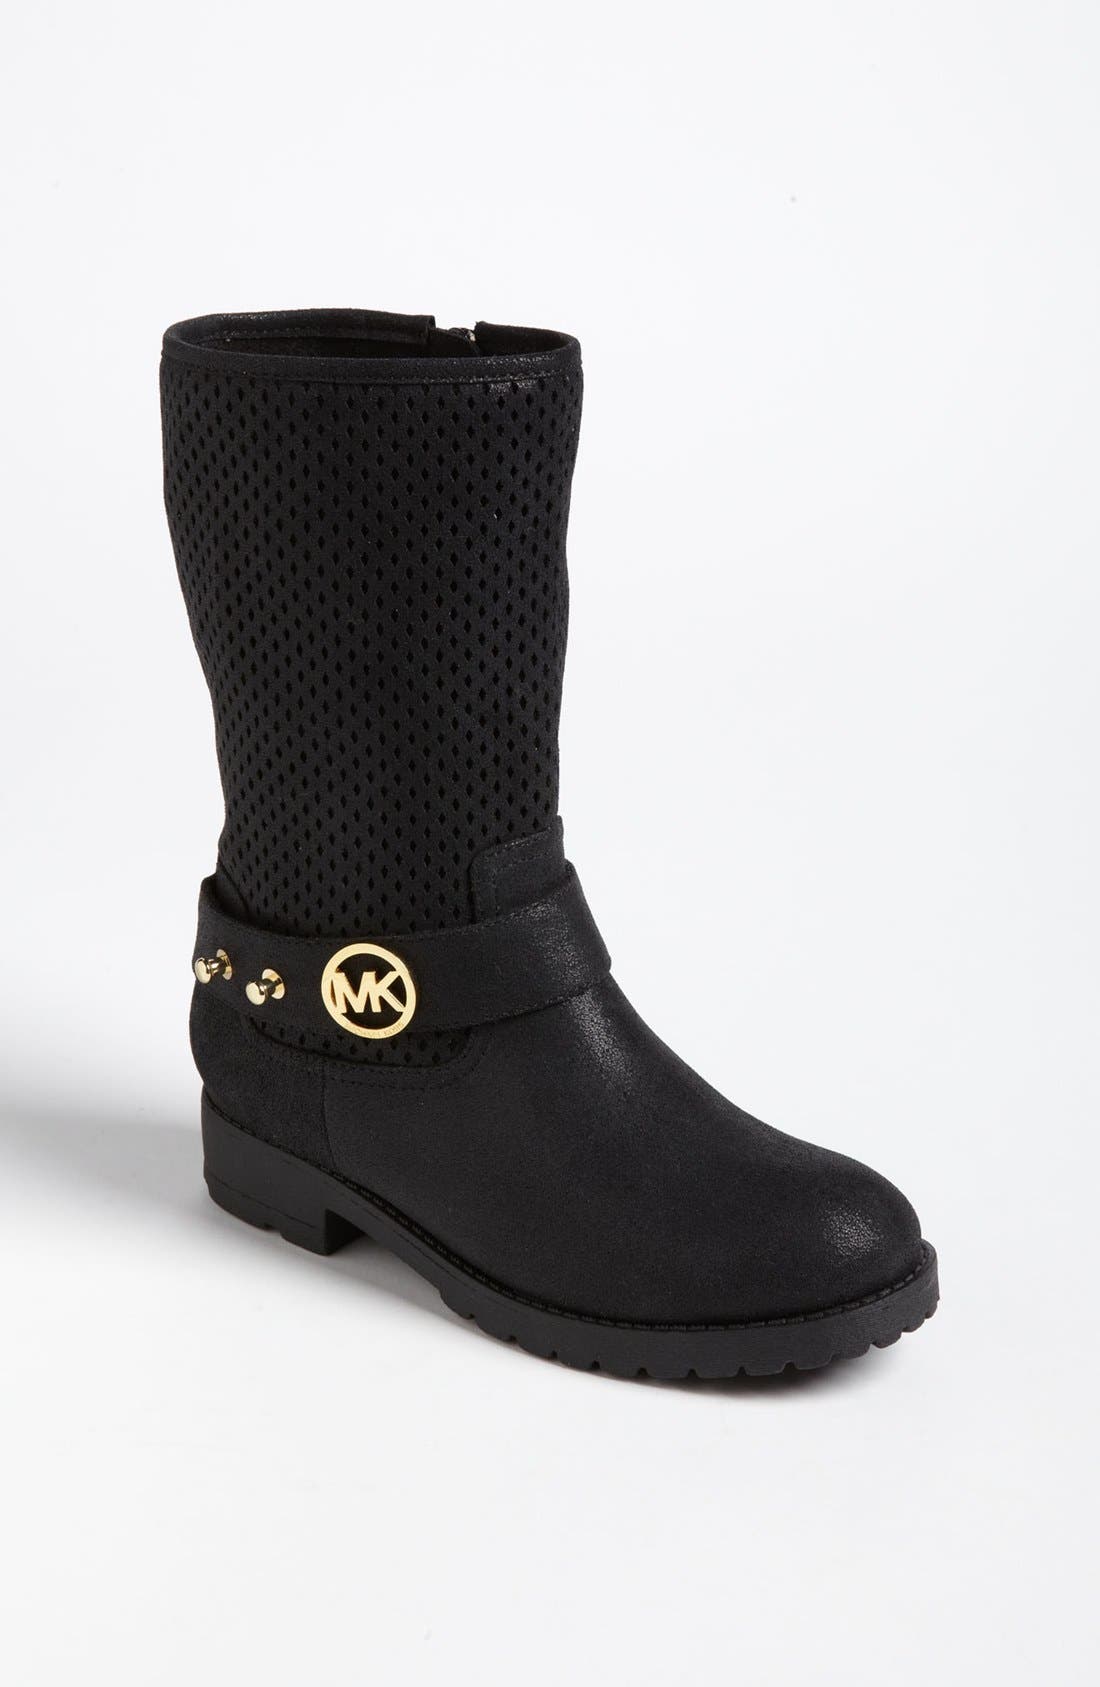 mk boots for toddlers